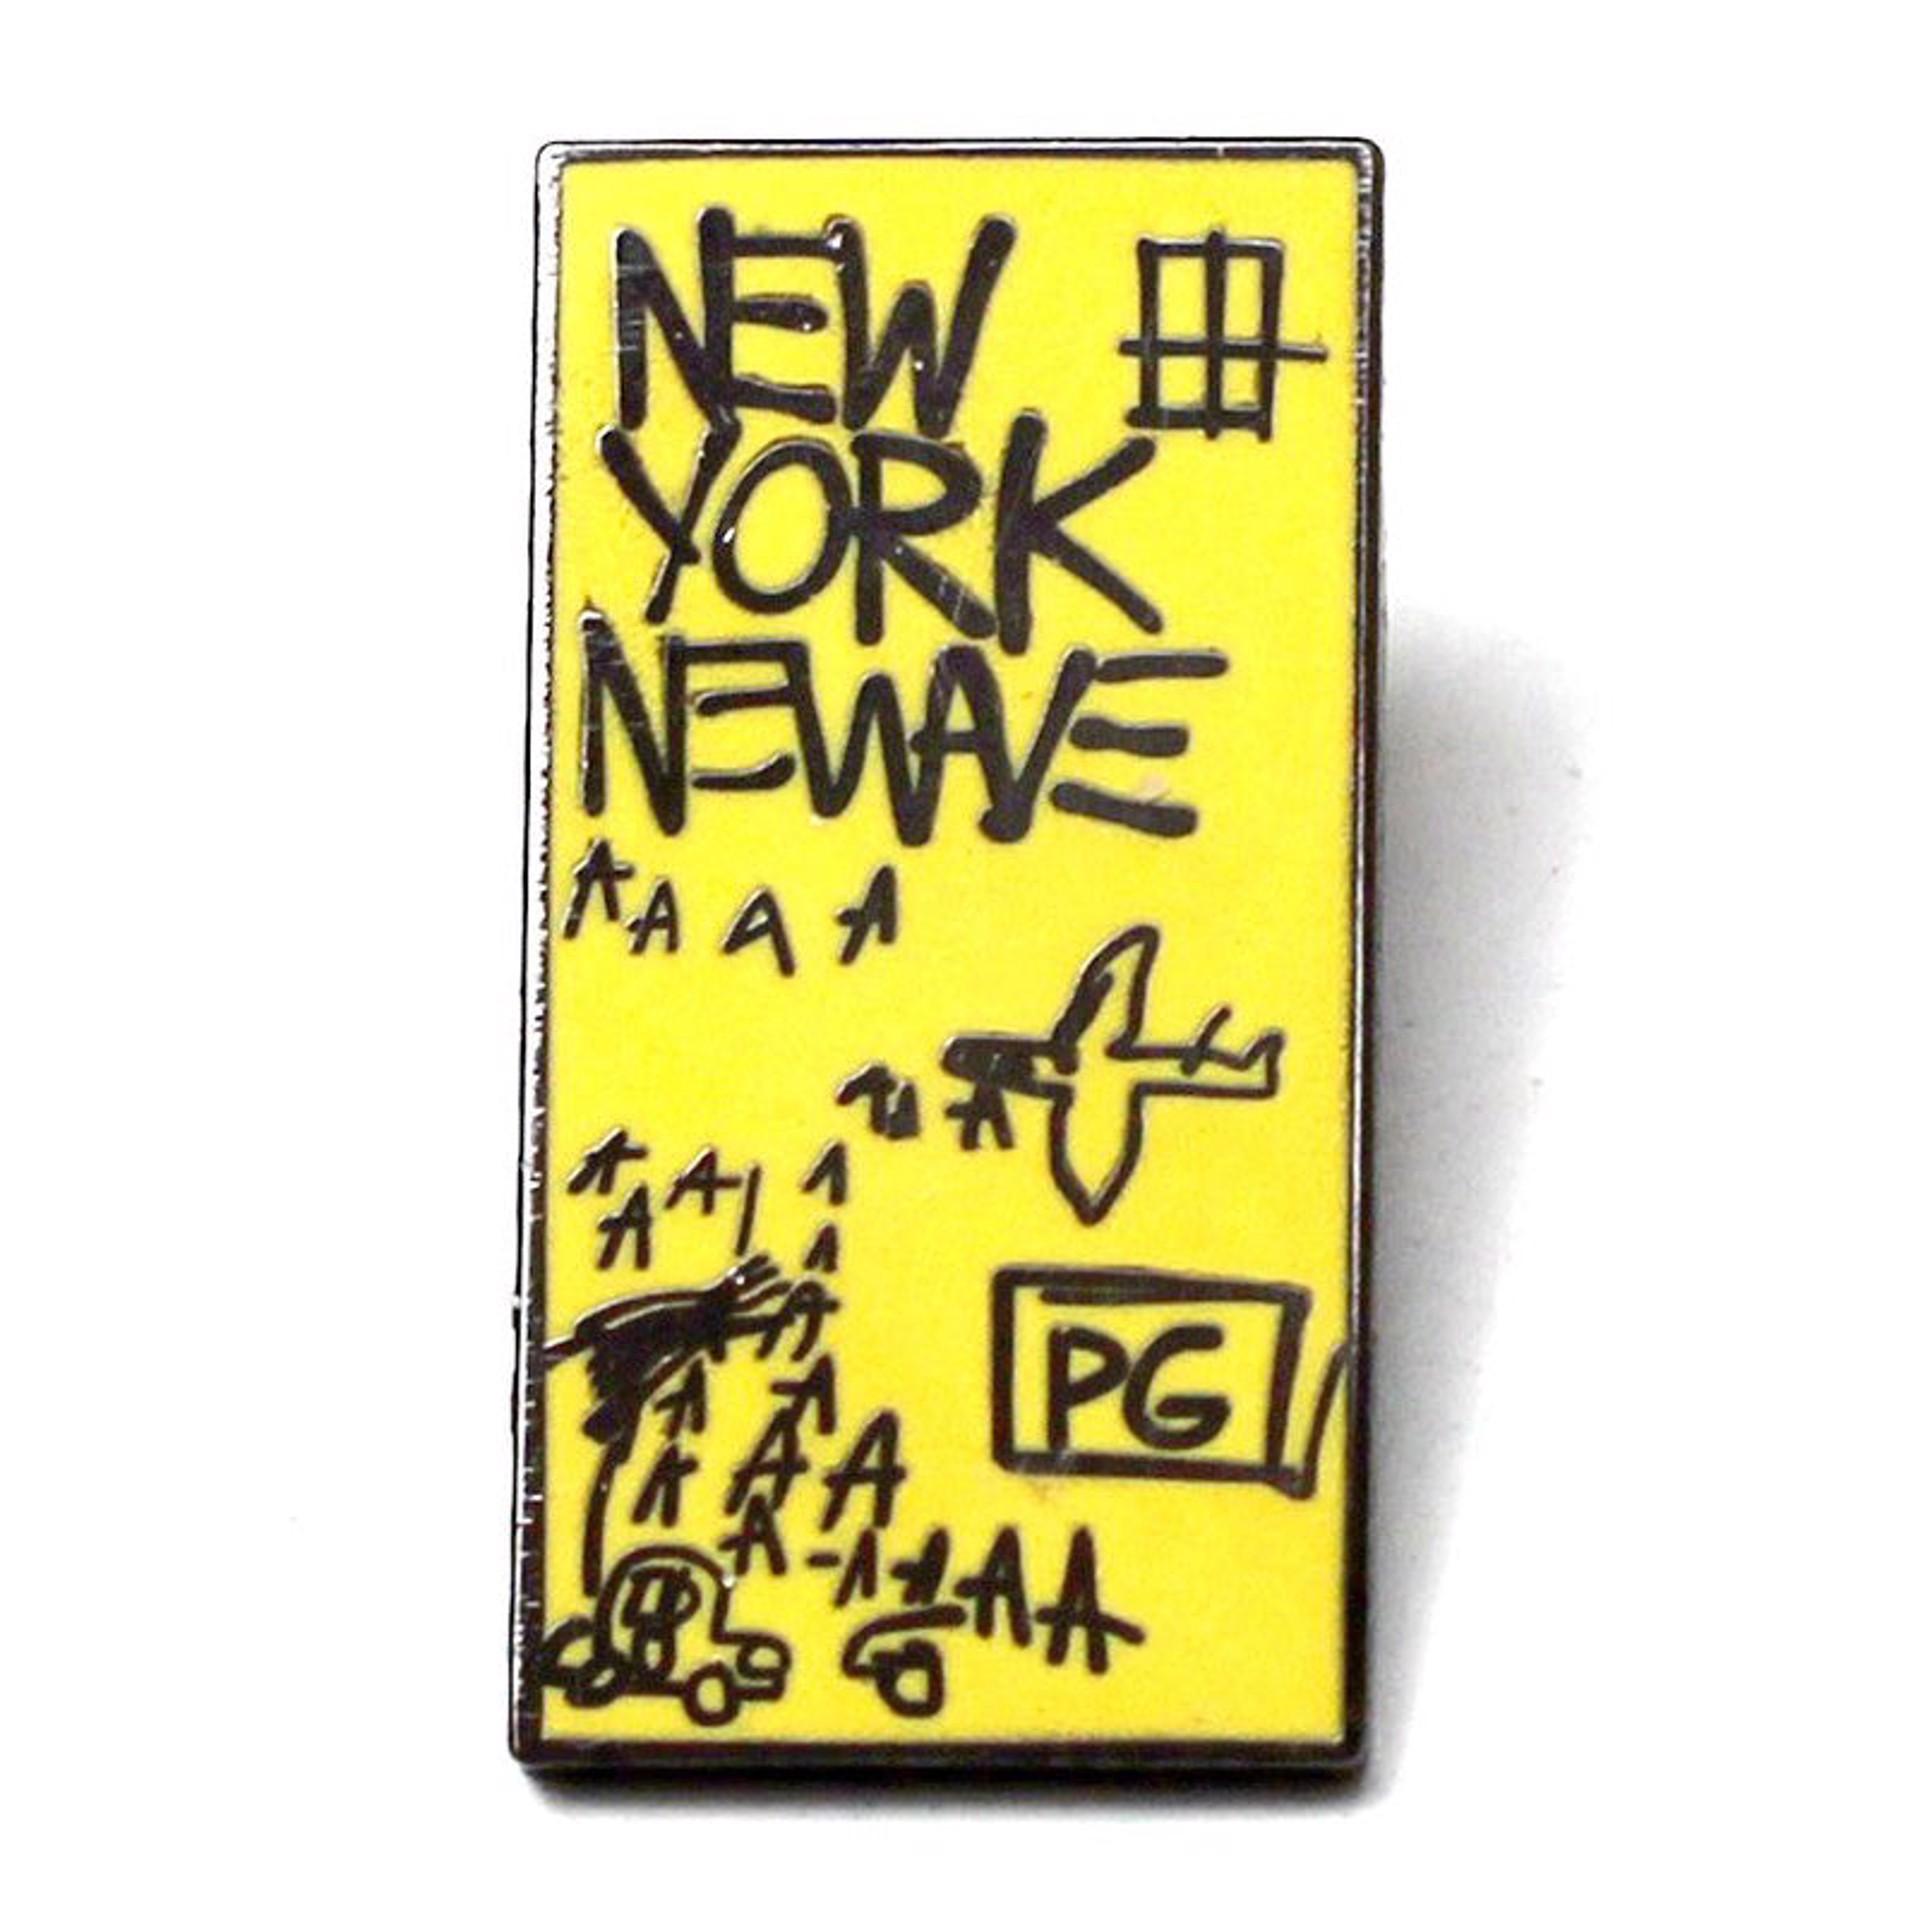 New York New Wave Pin by Jean-Michel Basquiat